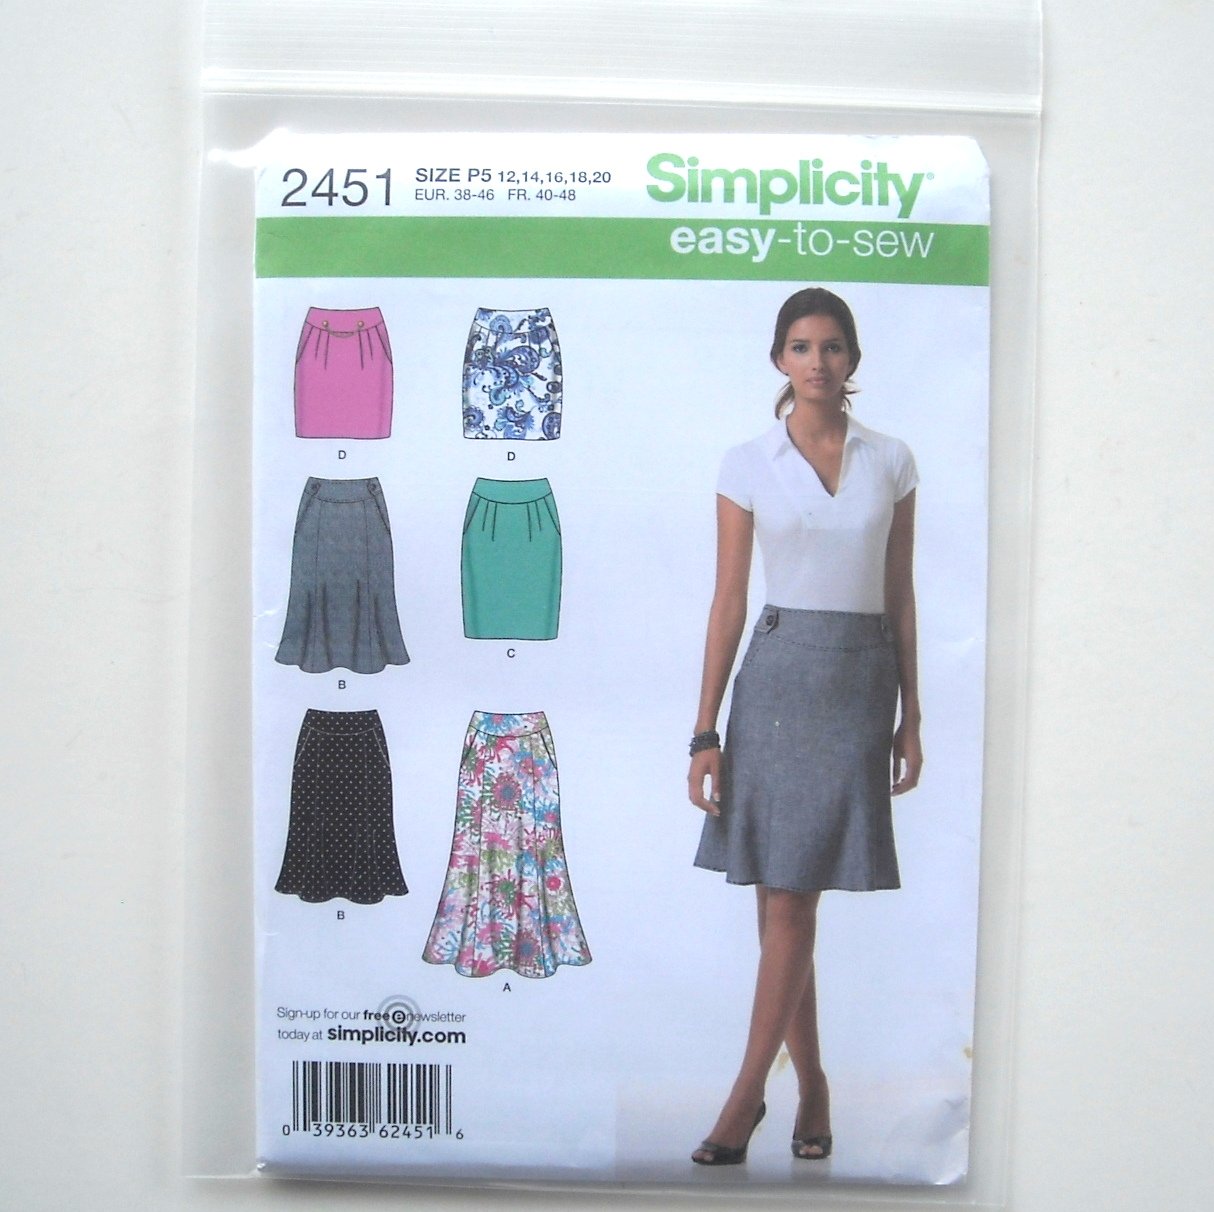 Simplicity Pattern 2451 Size 12 - 20 Easy To Sew Misses Womens Skirts